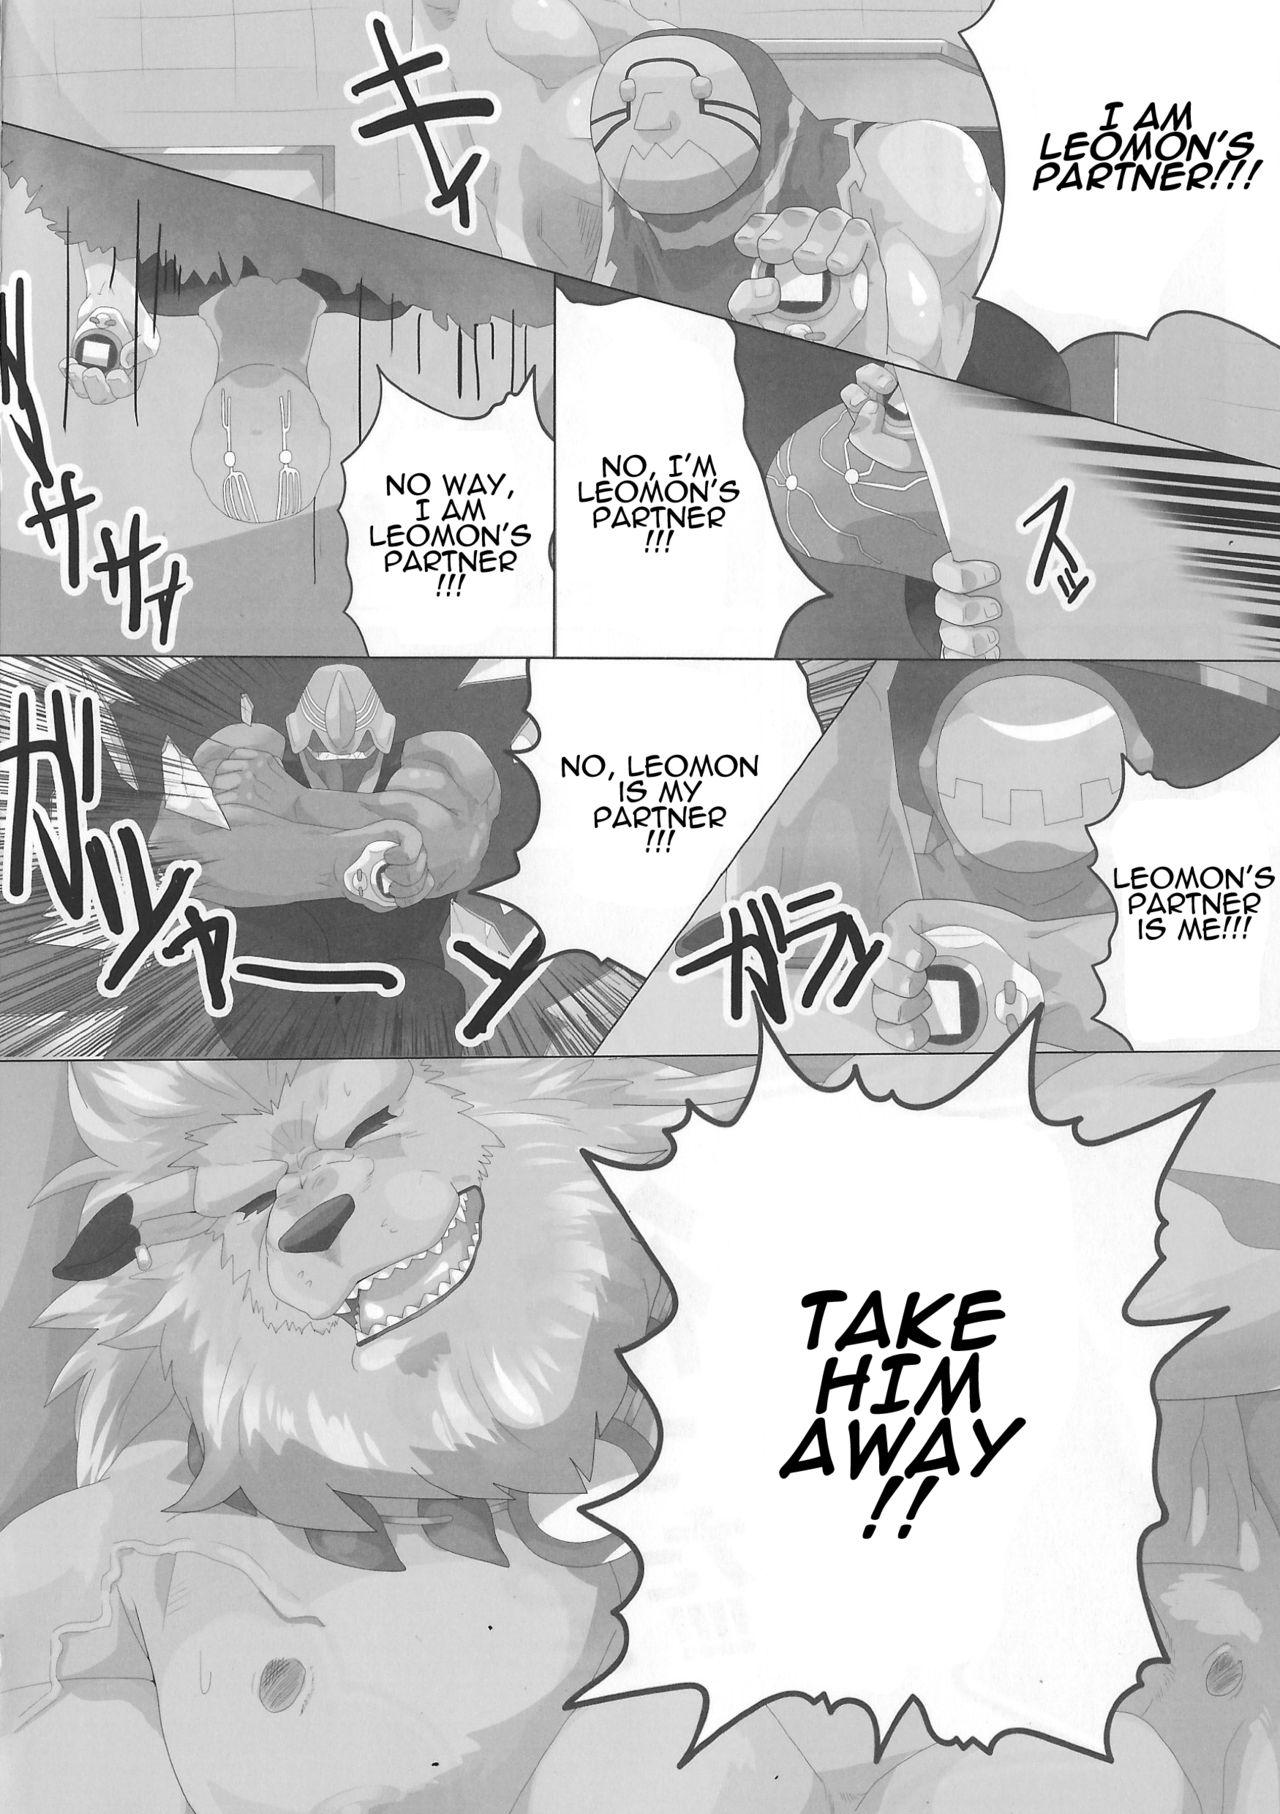 [Debirobu] For the Lion-Man Type Electric Life Form to Overturn Fate - Leomon Doujin [ENG] 6